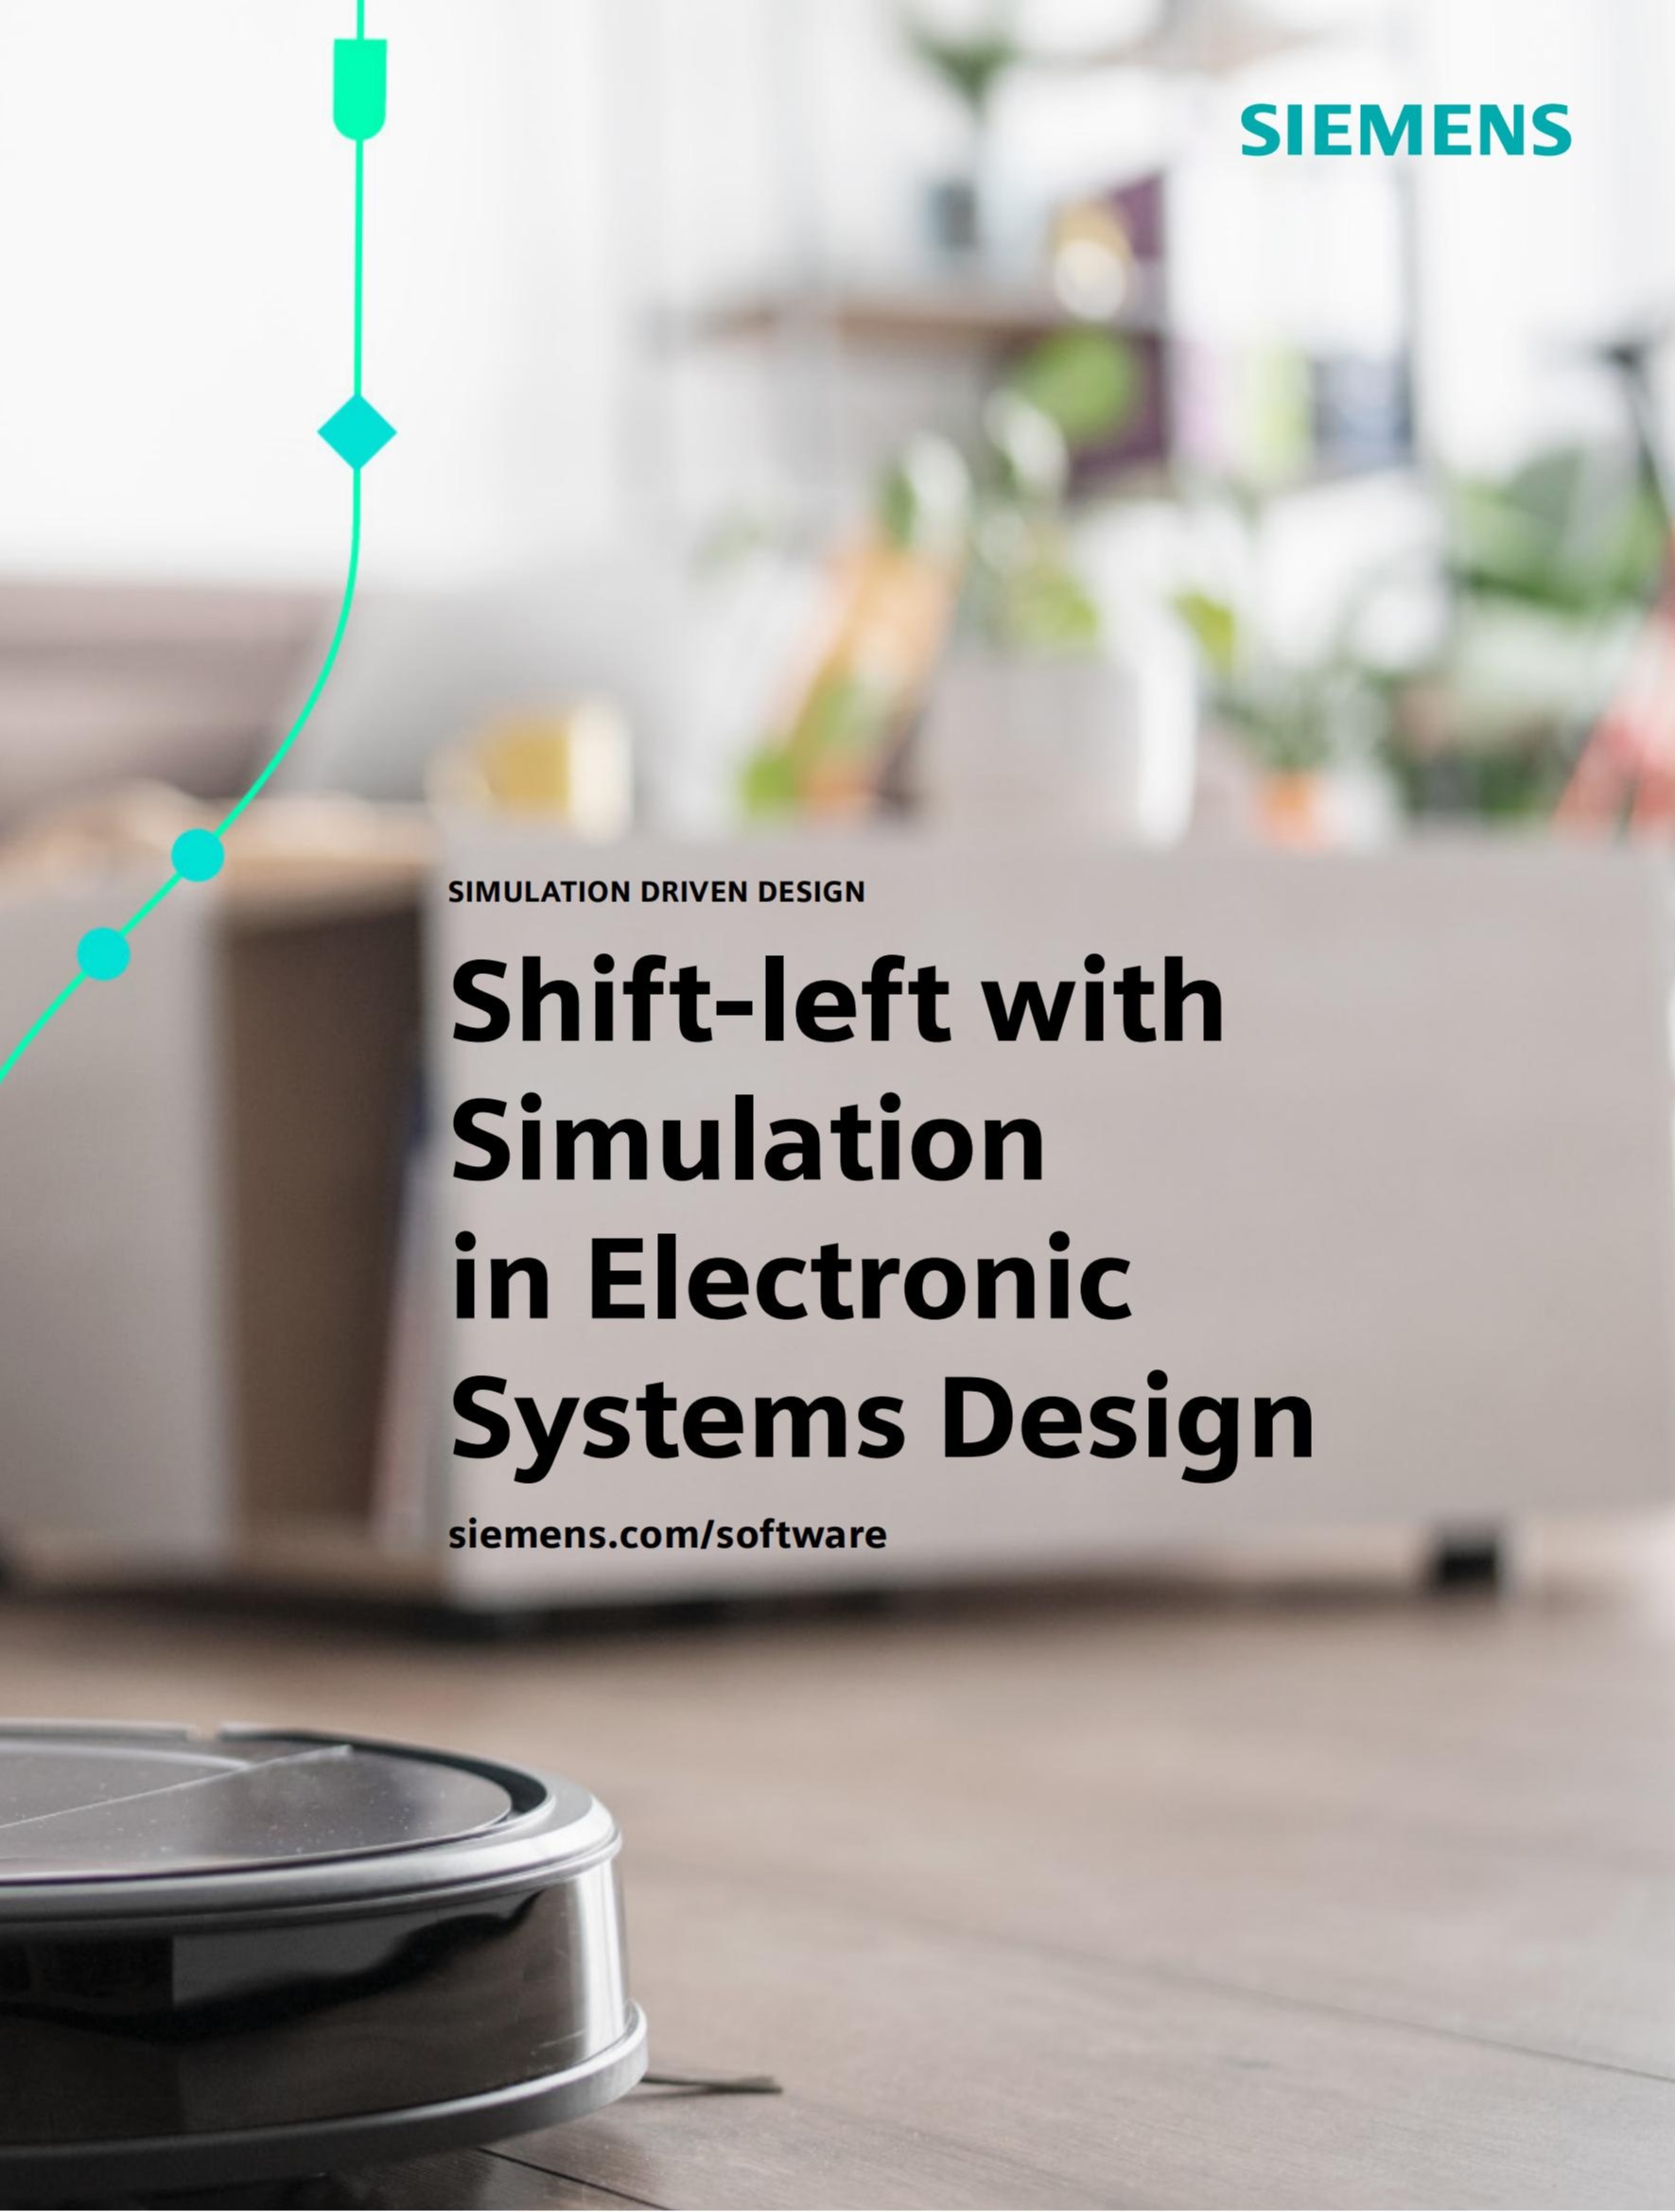 Design faster and better with electronics simulation-driven design to shift left